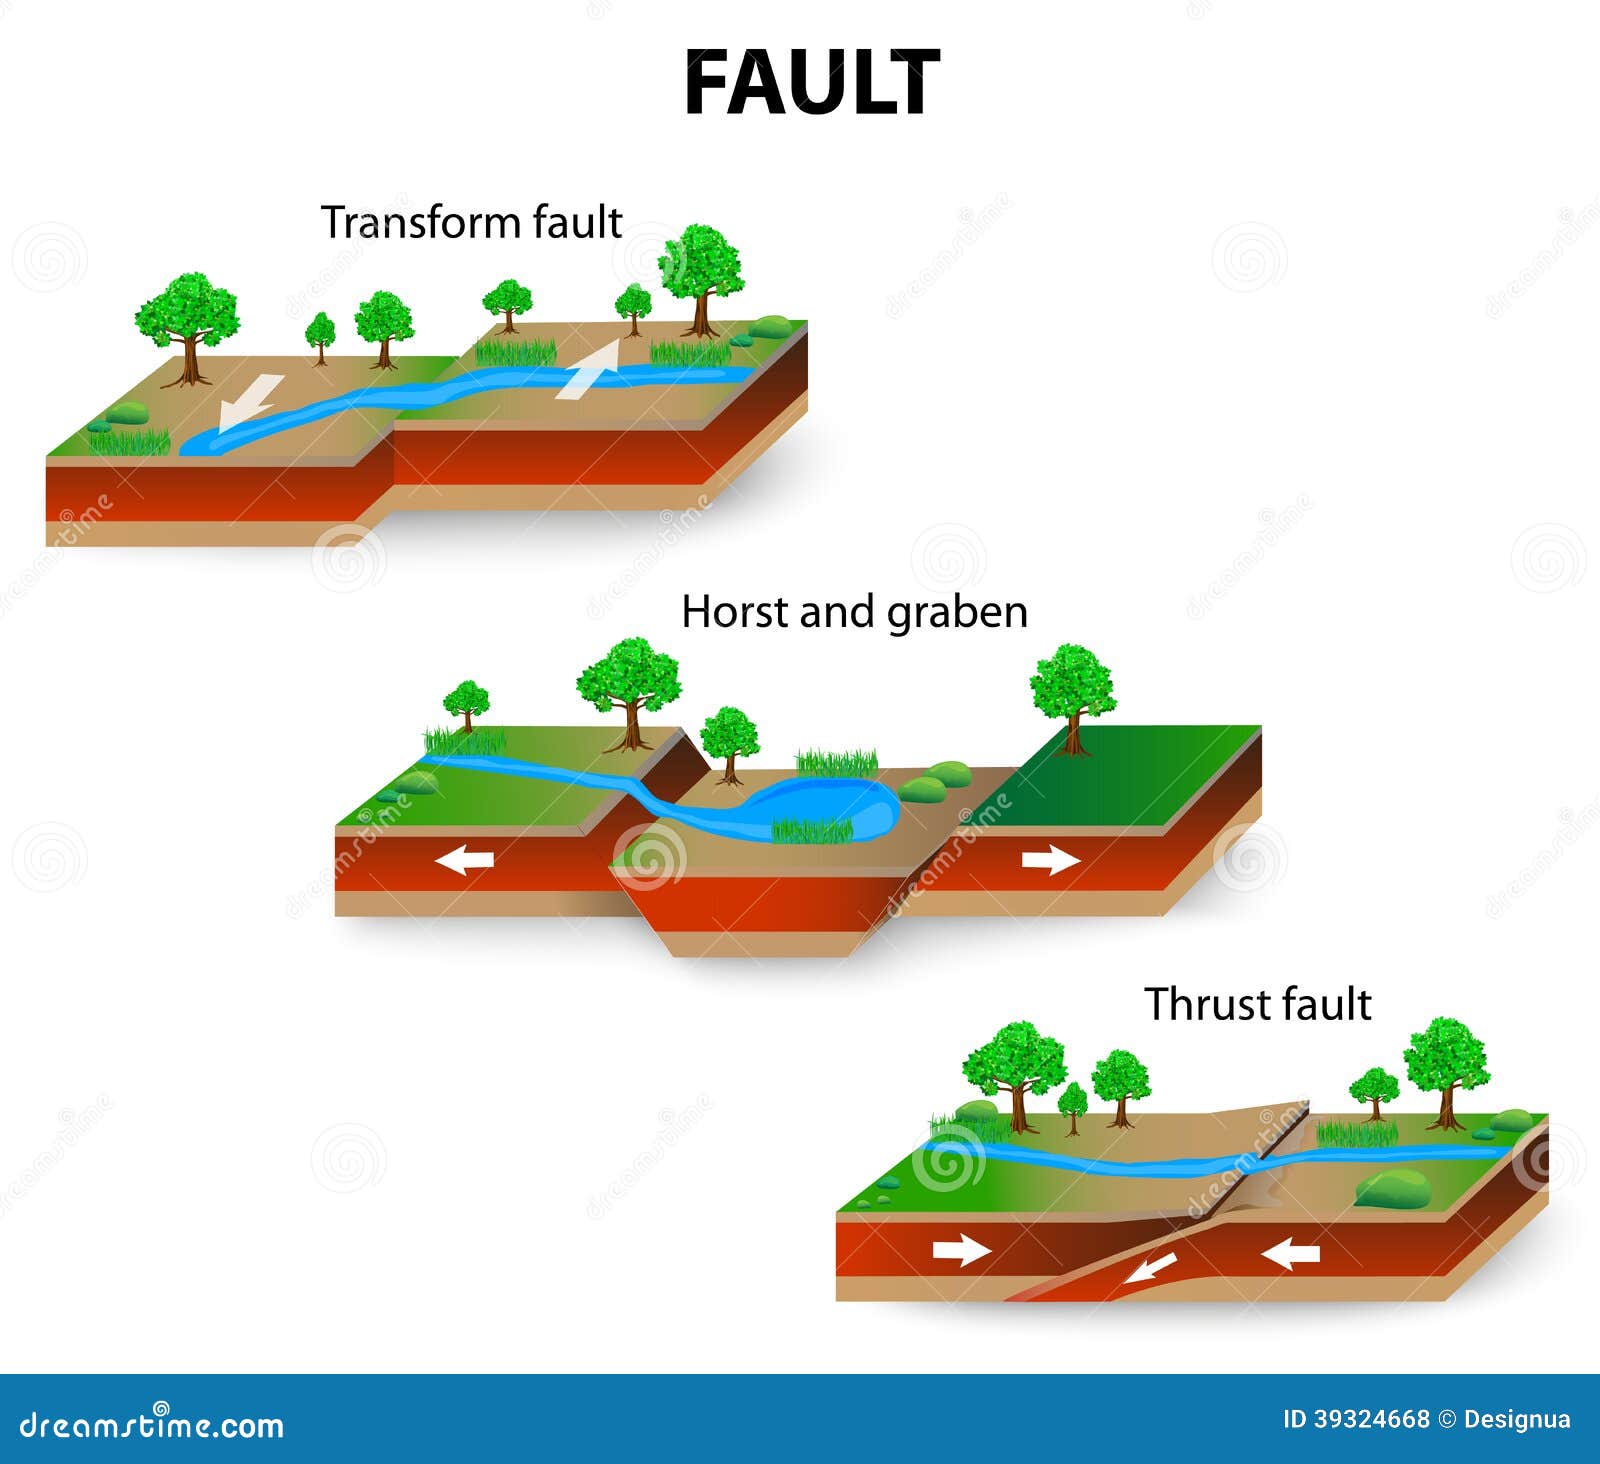 fault geology